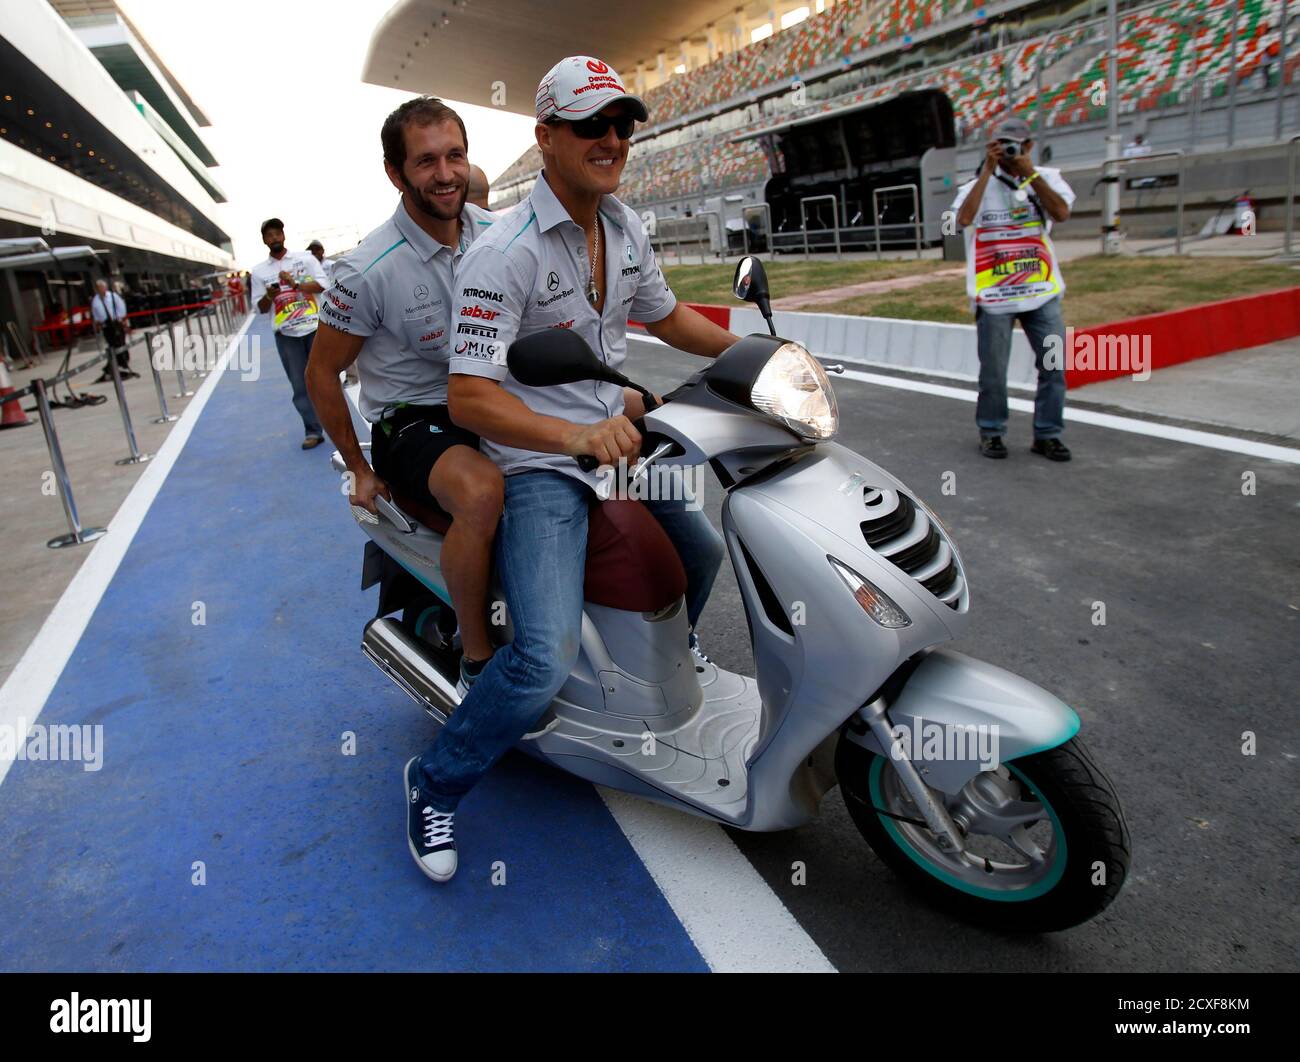 Mercedes Formula One driver Michael Schumacher of Germany and with a team  member ride on a scooter as they leave their pit to inspect the track at  the Buddh International Circuit in